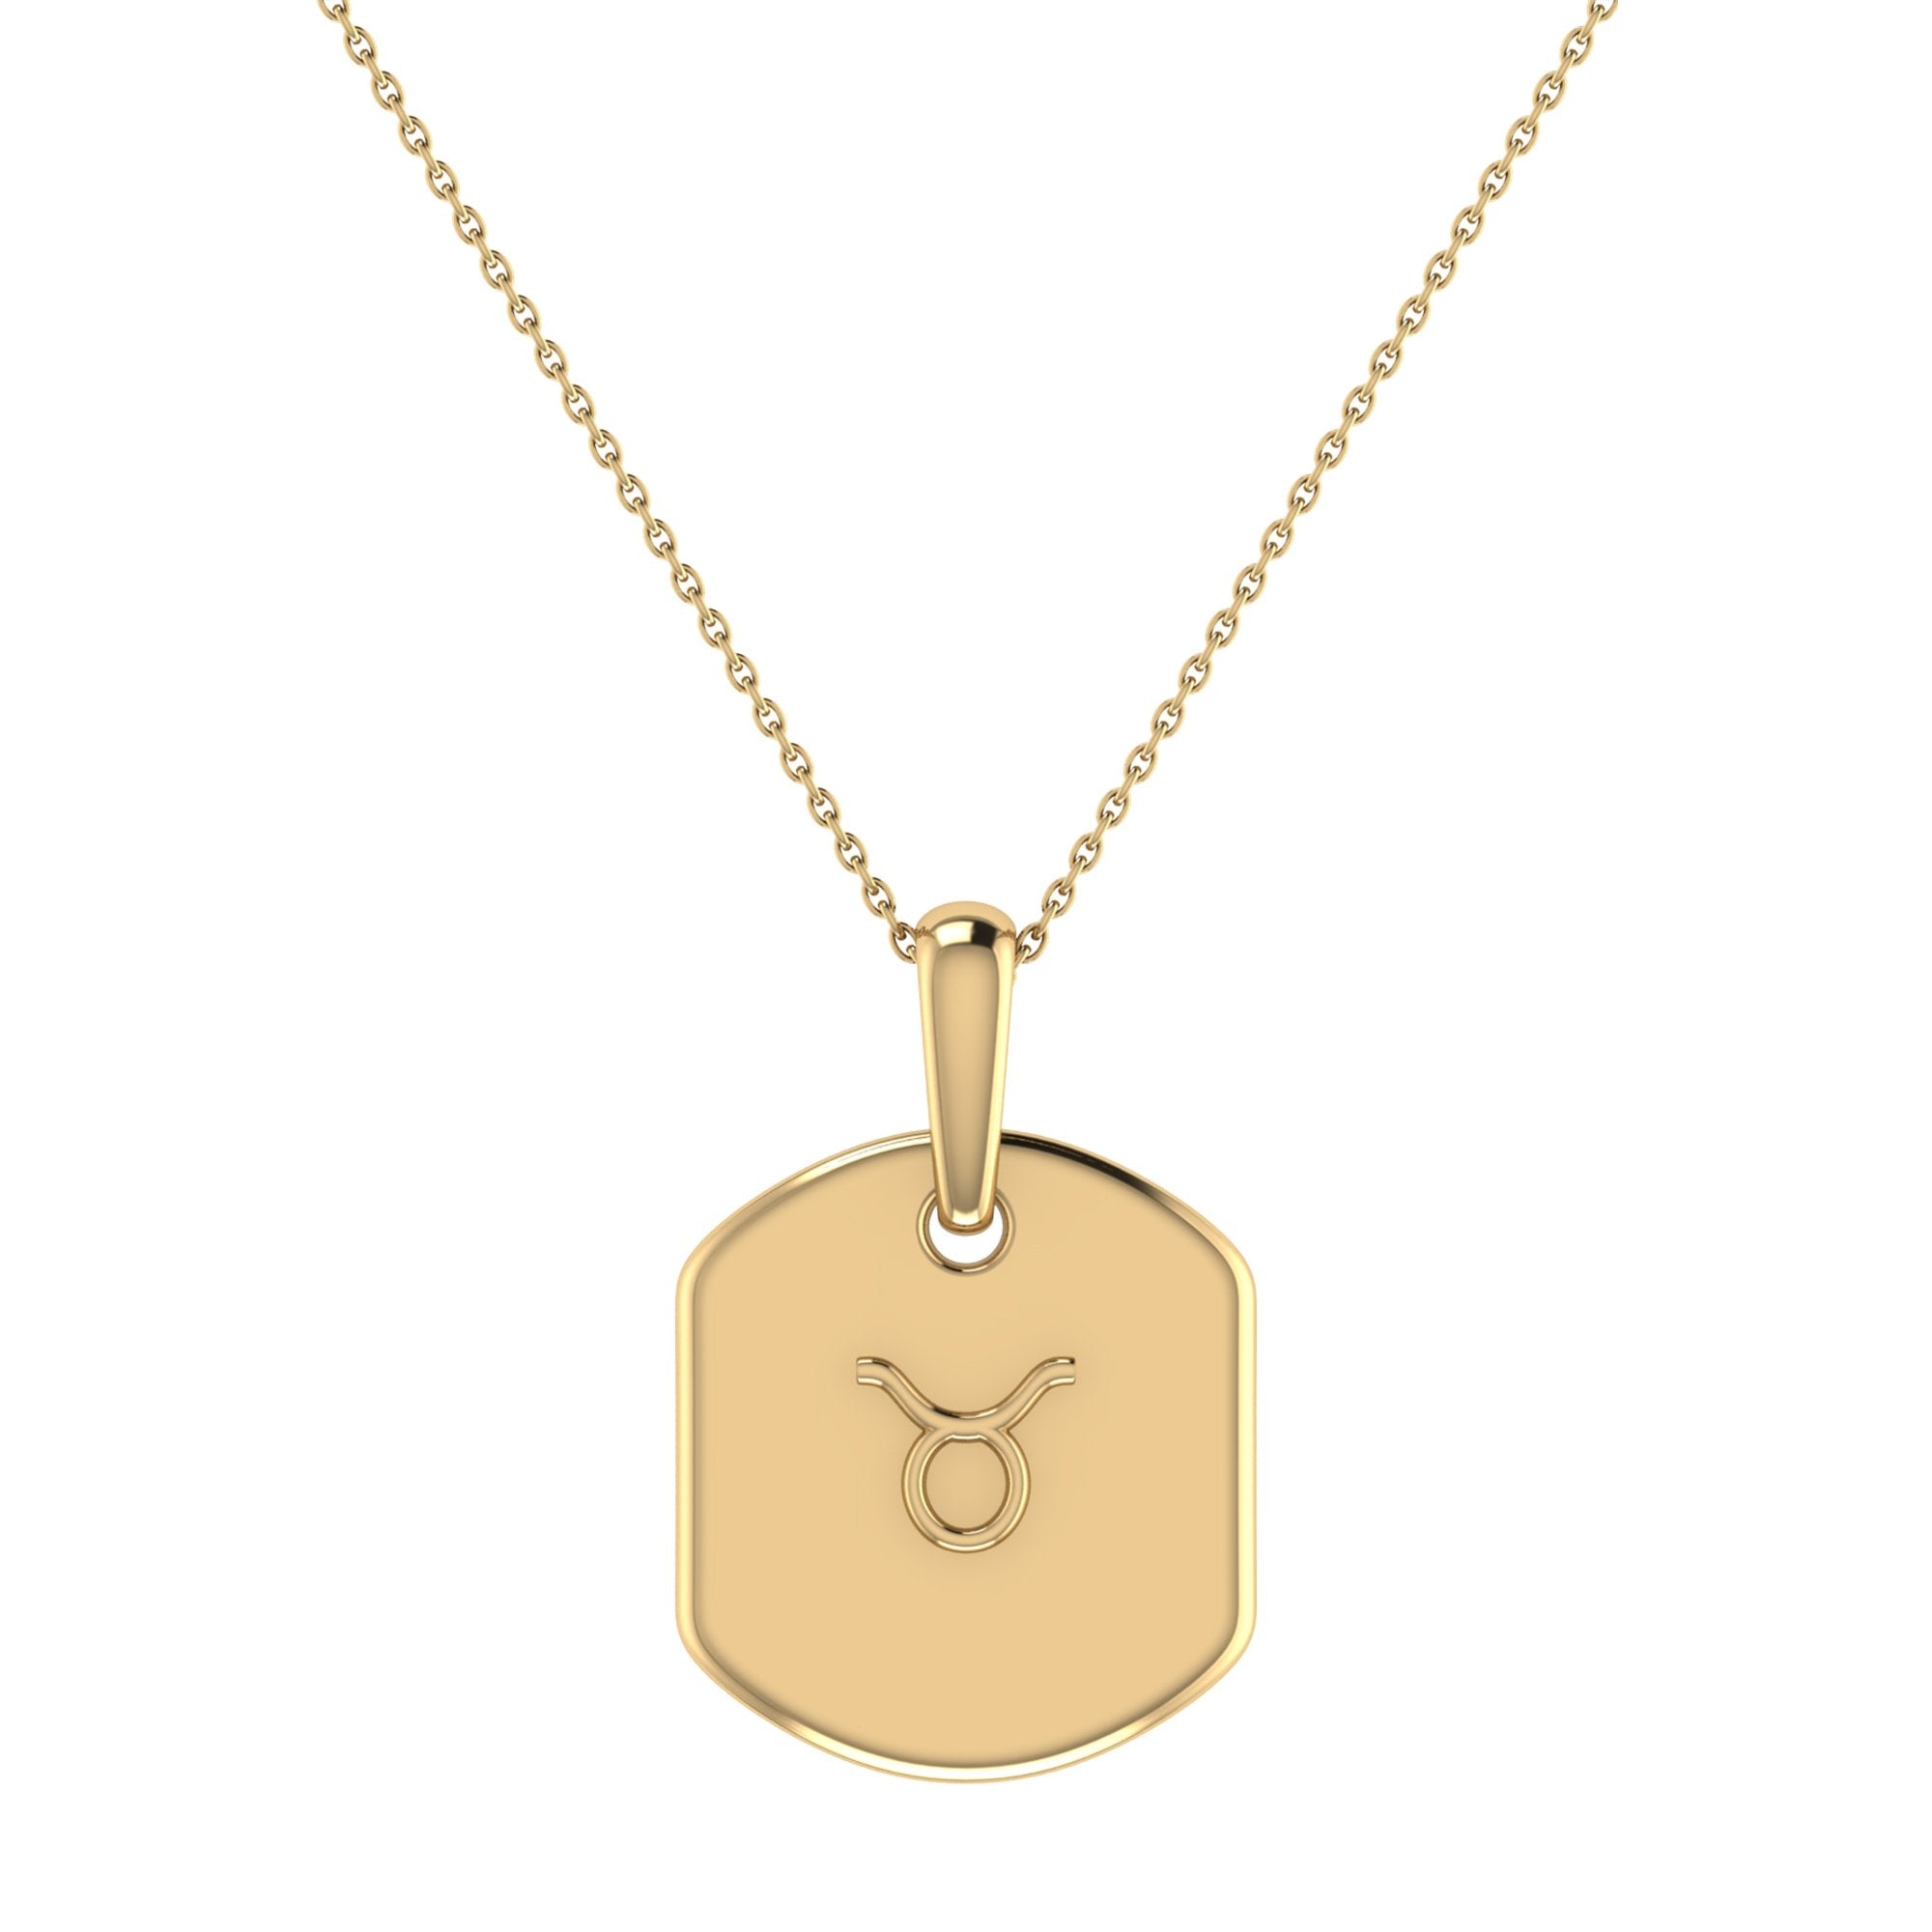 Taurus Bull Emerald & Diamond Pendant Necklace - 14K Yellow Gold
Celebrate your Taurus zodiac sign with our elegant pendant necklace featuring an emerald gemstone and natural diamonds. Adjustable 18" chain included. - Jewelry & Watches - Bijou Her -  -  - 